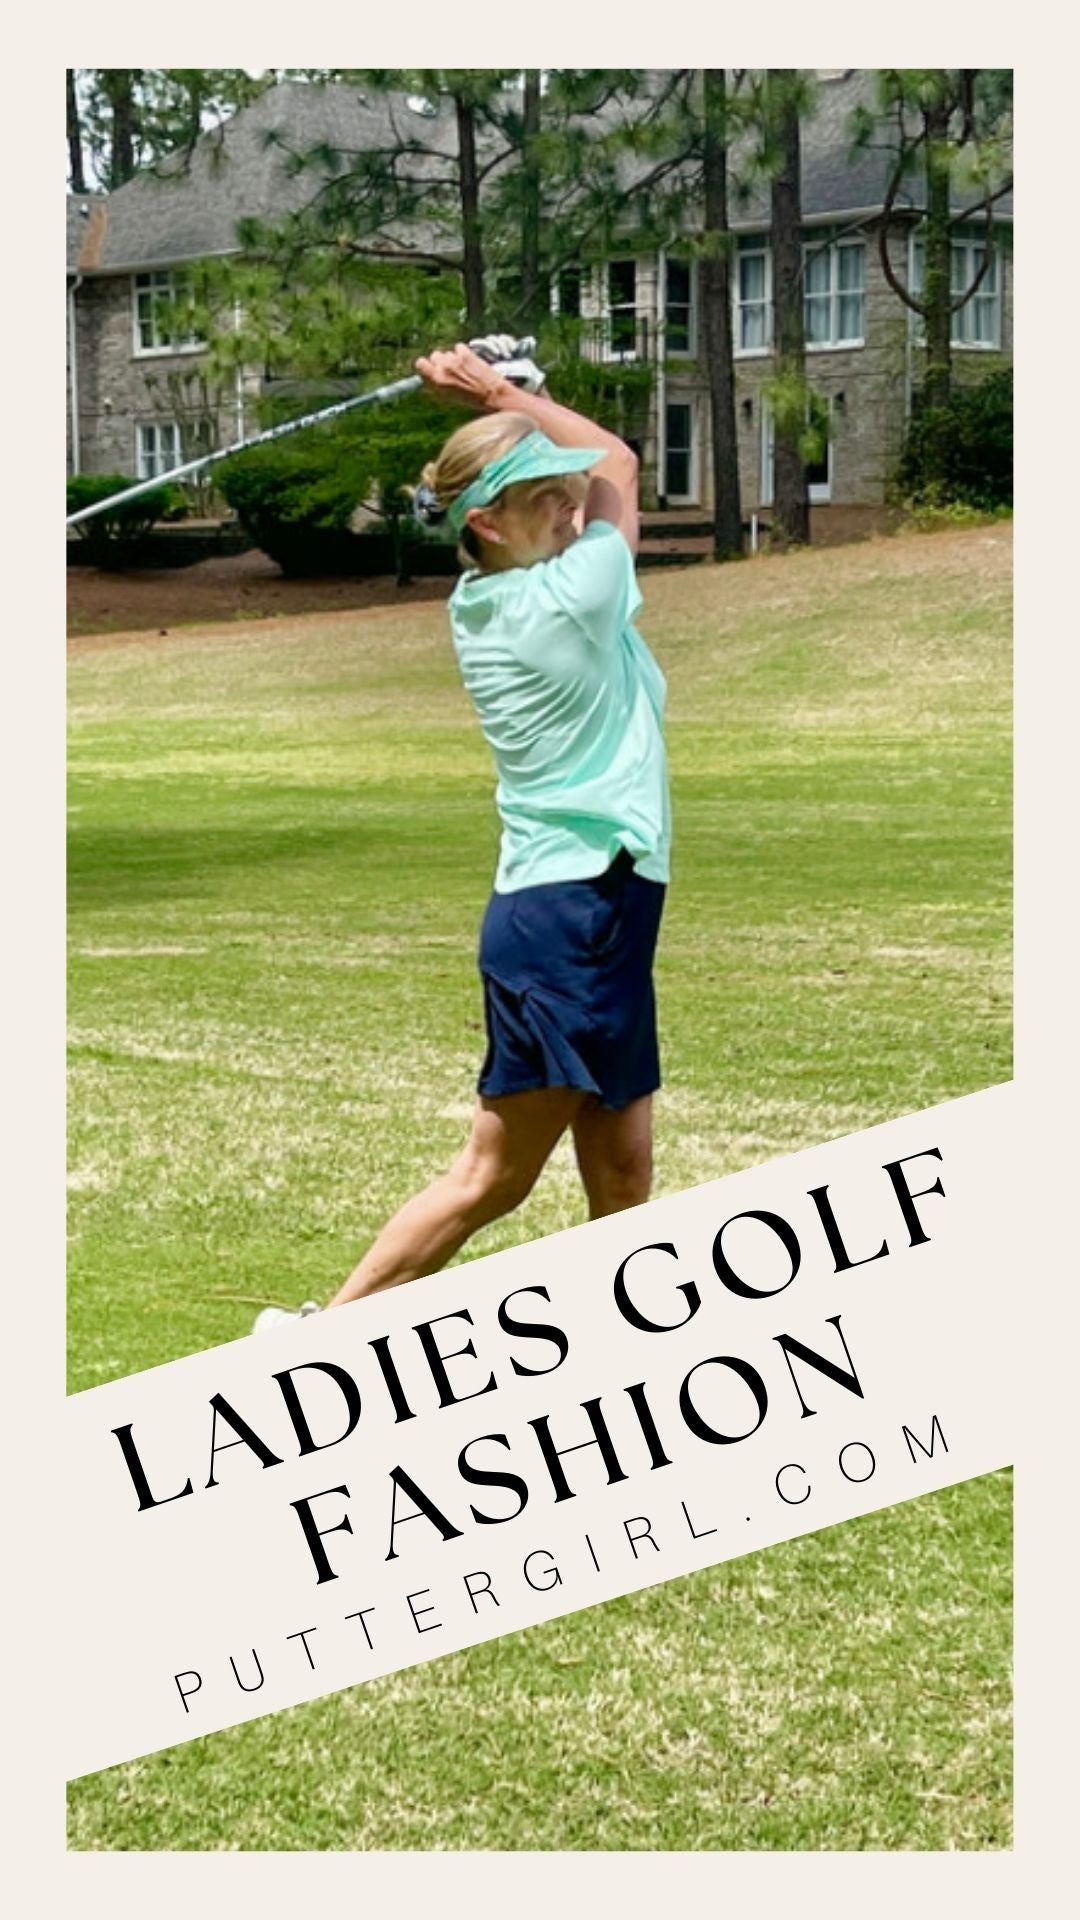 Stylish Golf Fashion with Putter Girl: Women's Golf Clothing and Accessories